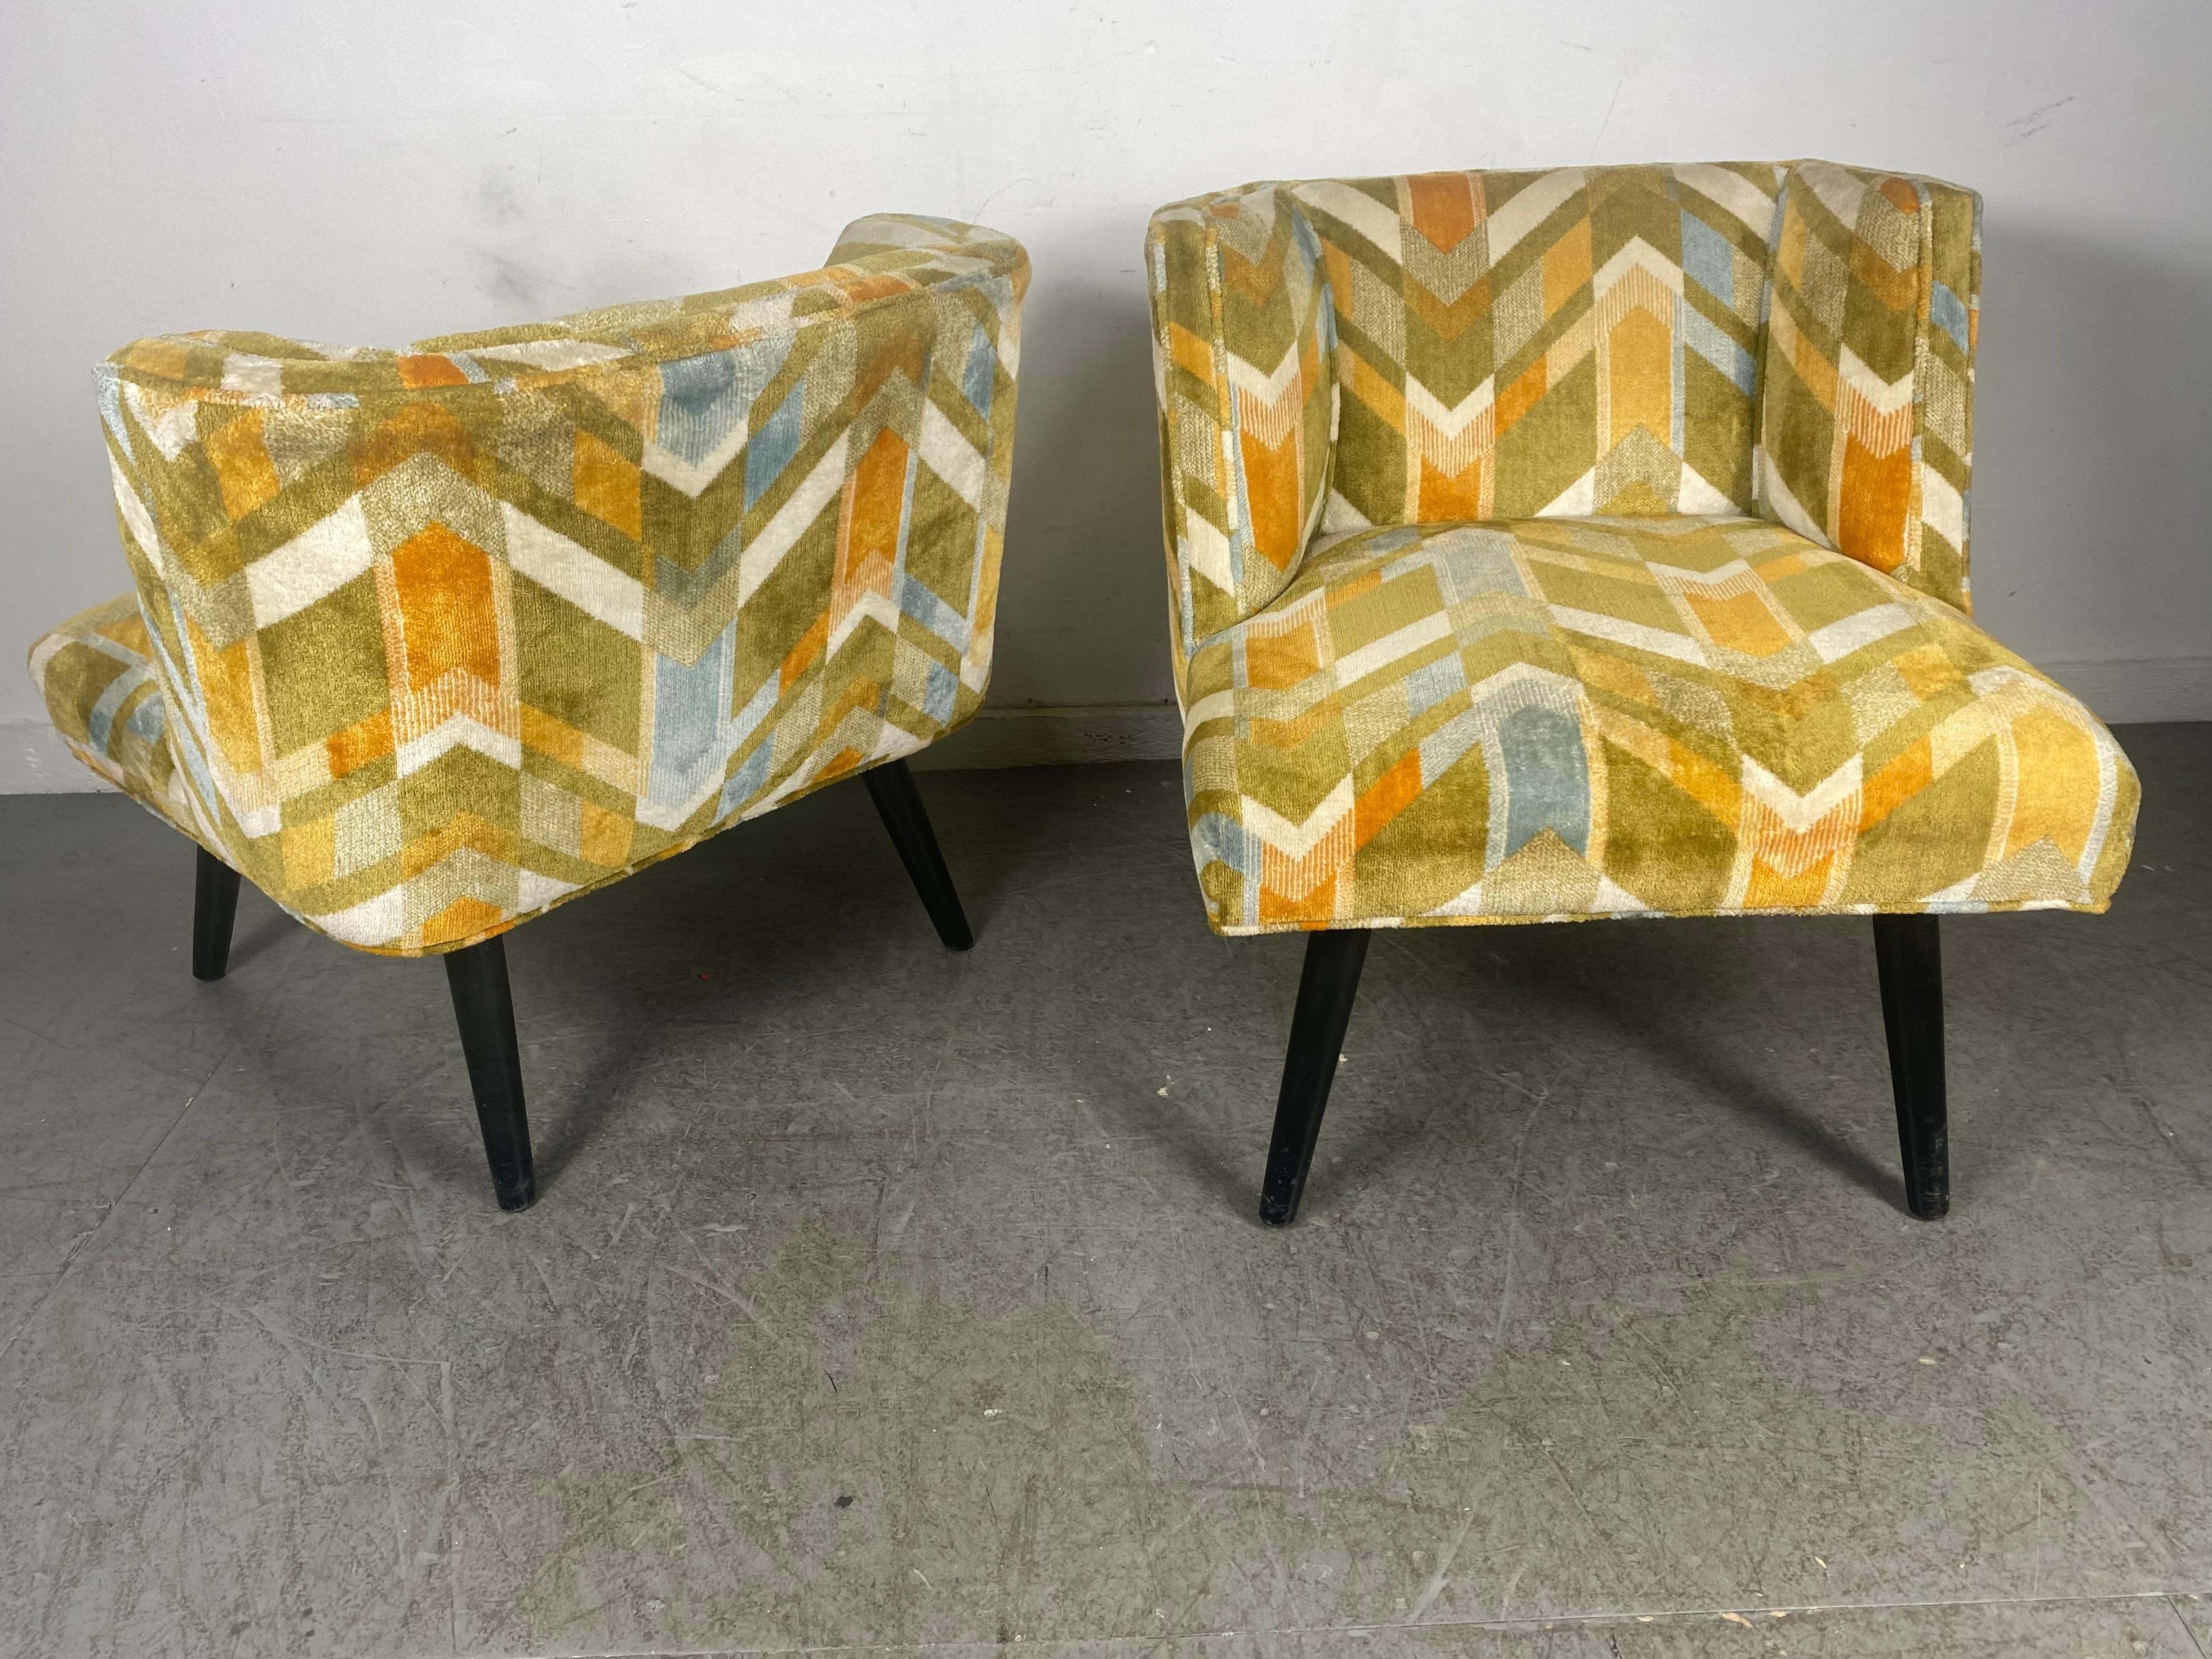 Lacquered Pair Modernist Lounge Chairs, California Modern Manner of James Mont